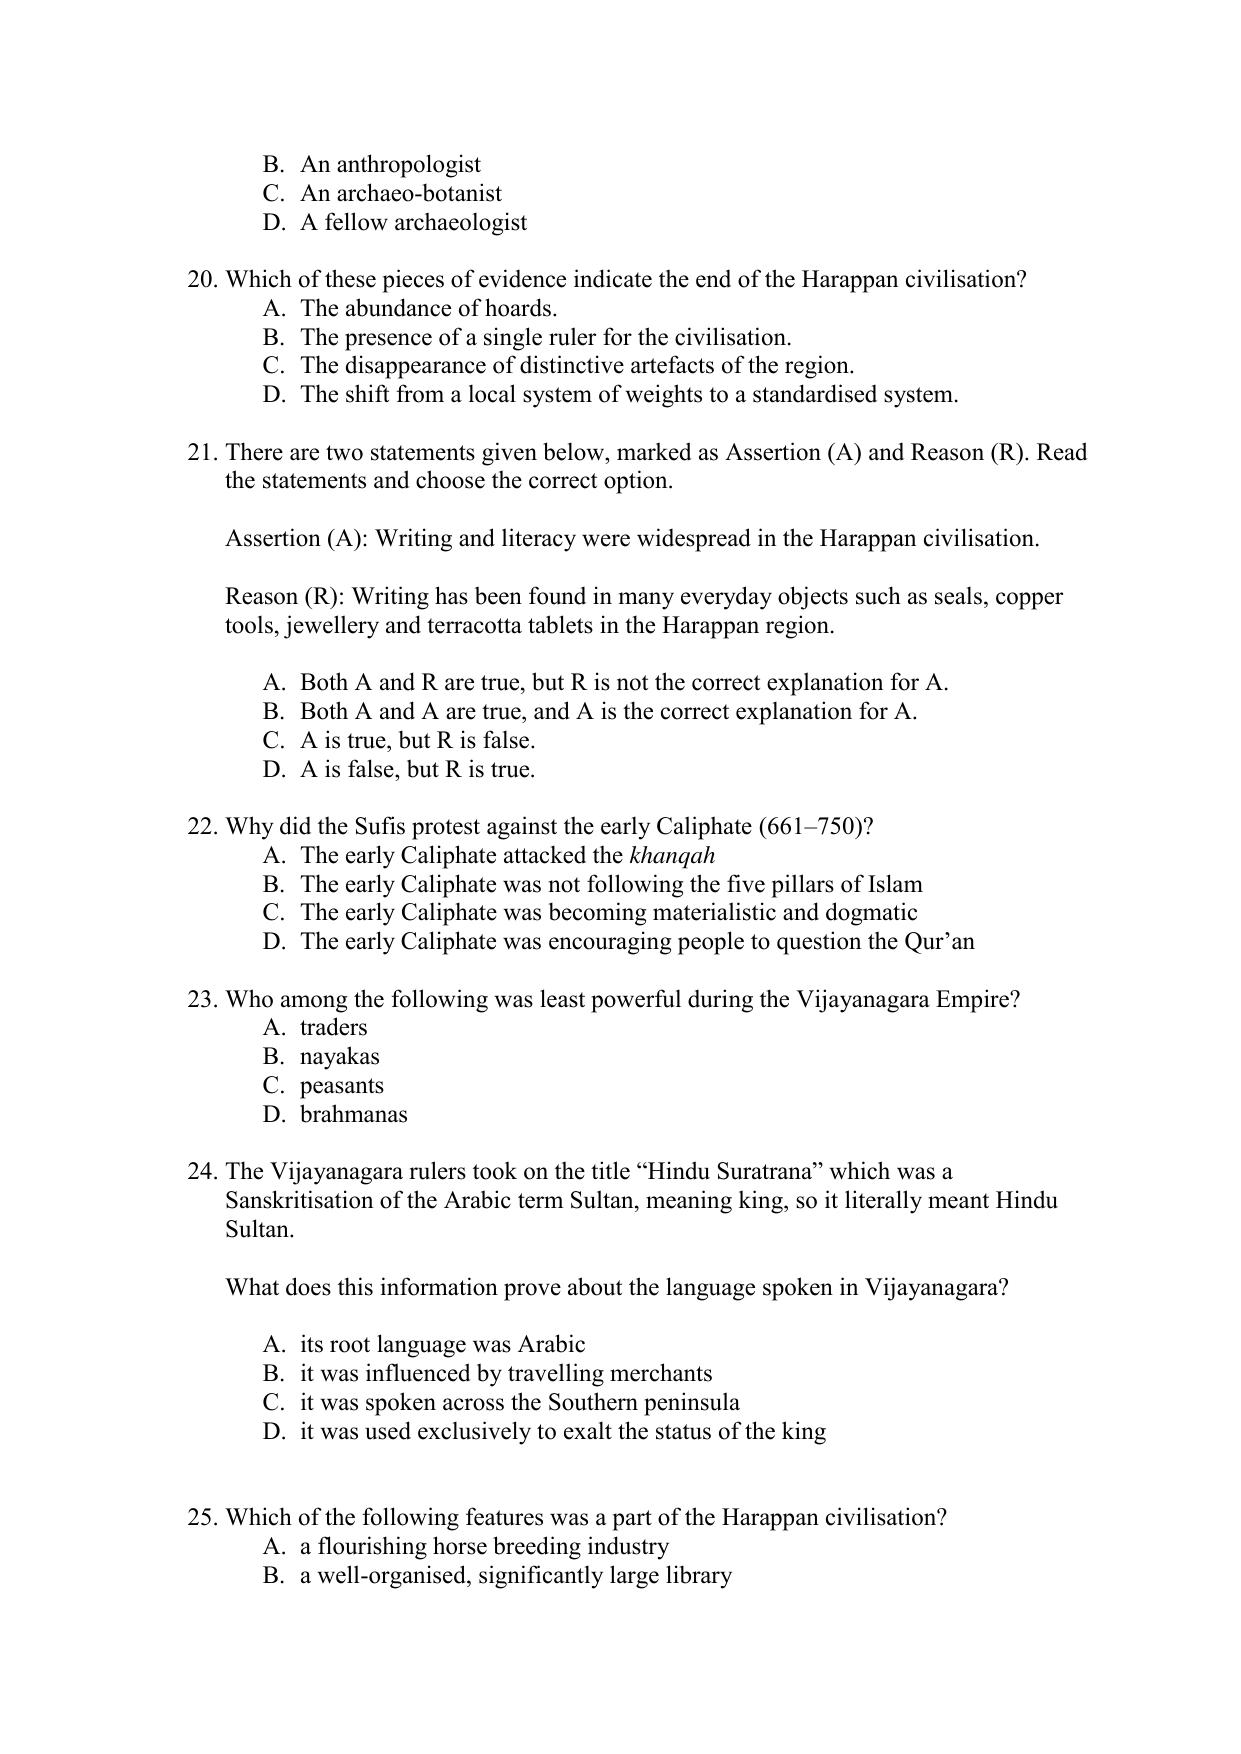 CBSE Class 12 History Term 1 Practice Questions 2021-22 - Page 5